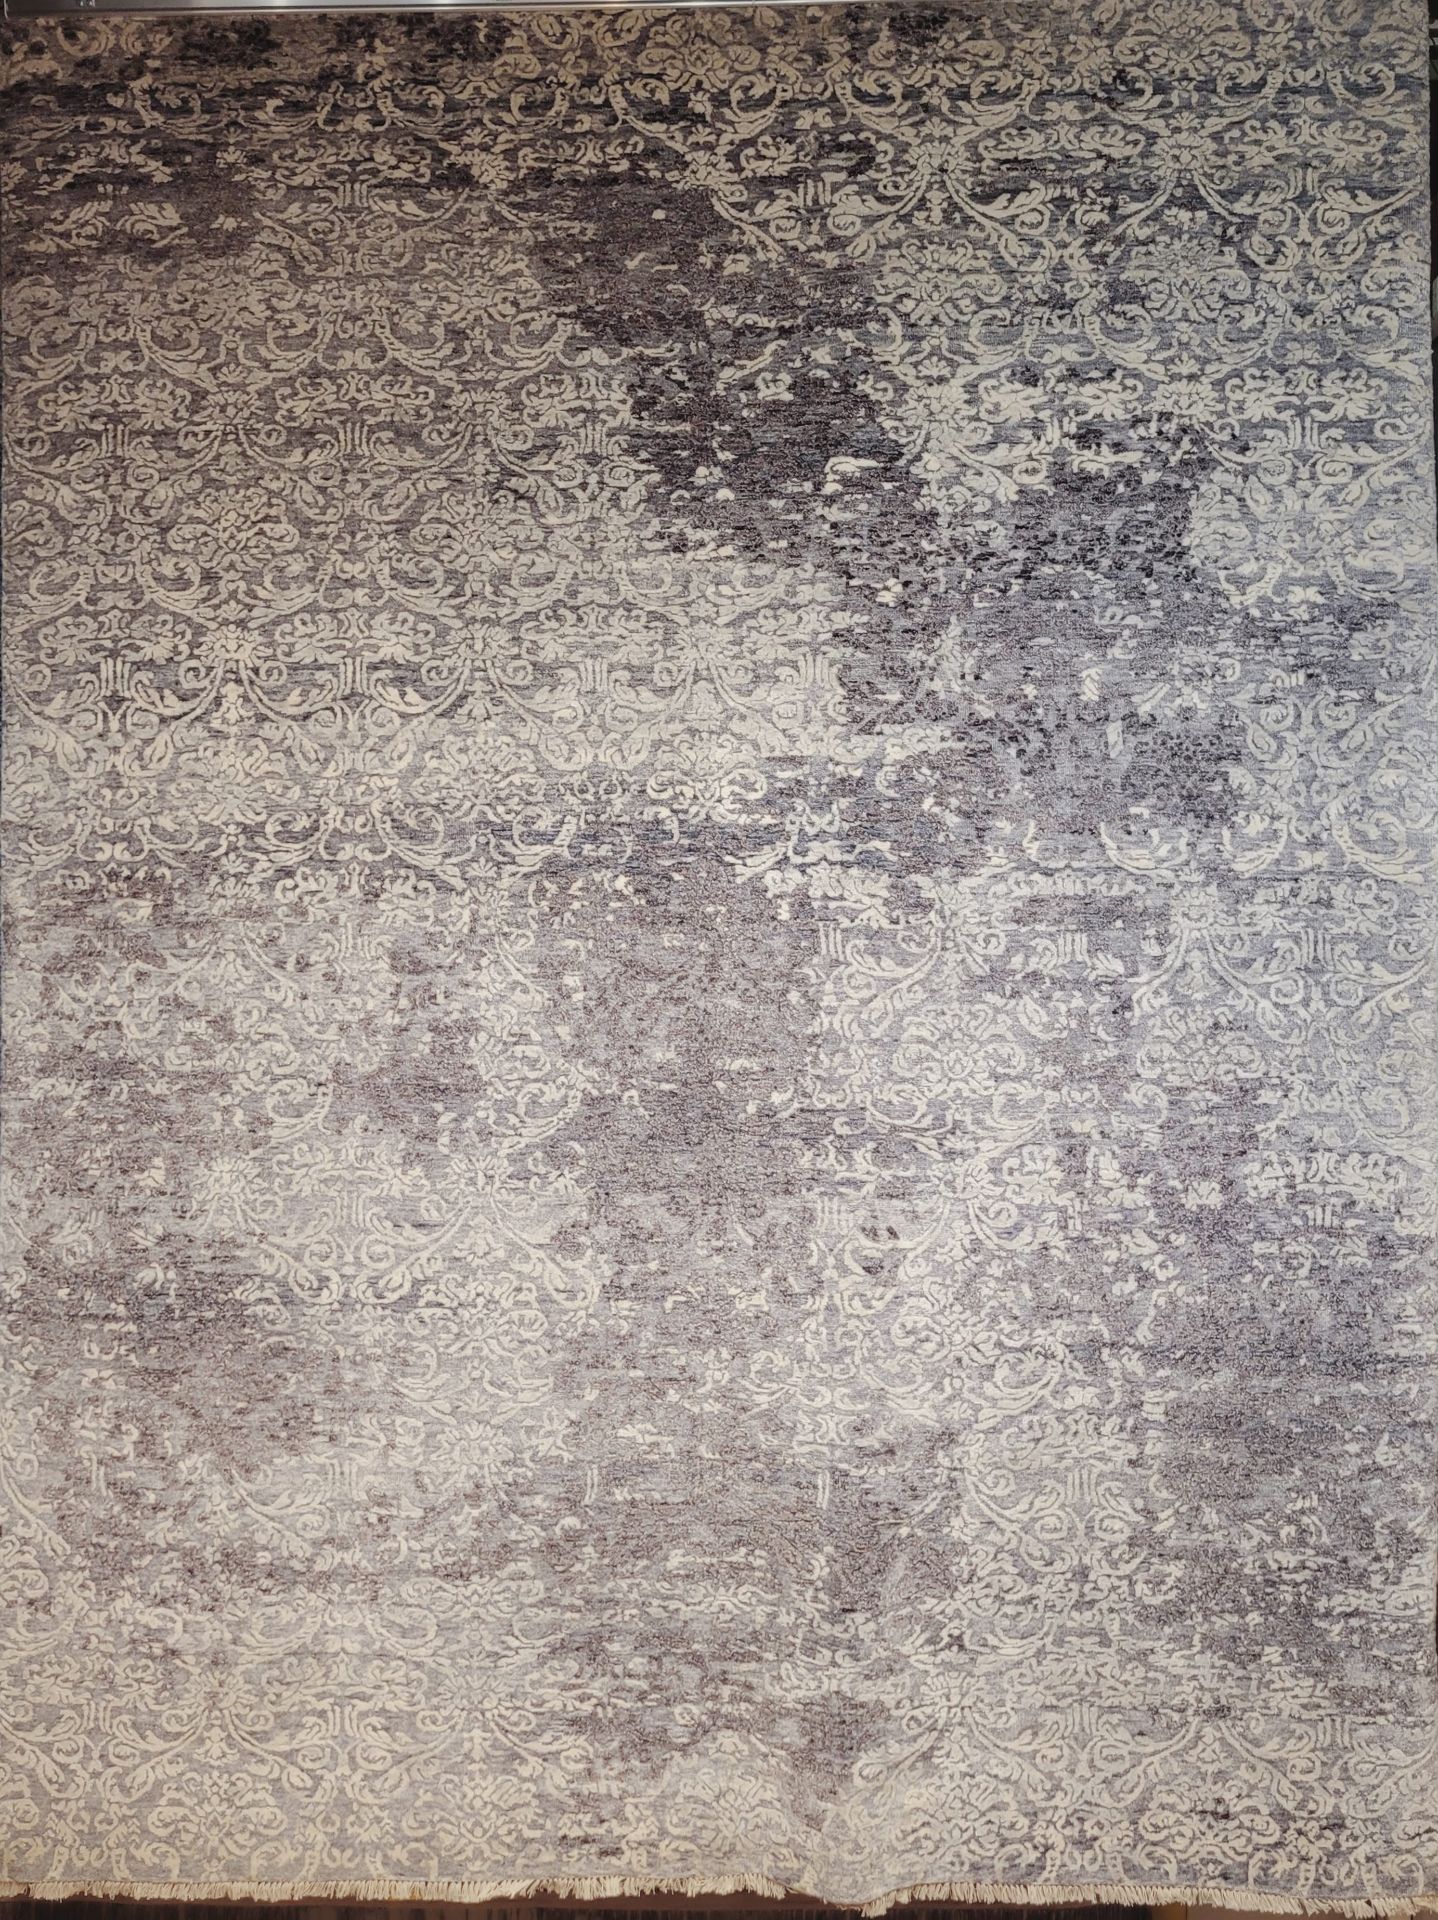 APPROX 8' x 10' - GRAY/SILVER - ART. SILK HAND KNOTTED IN INDIA - MSRP $5,997.00 (LOCATED IN GALLERY